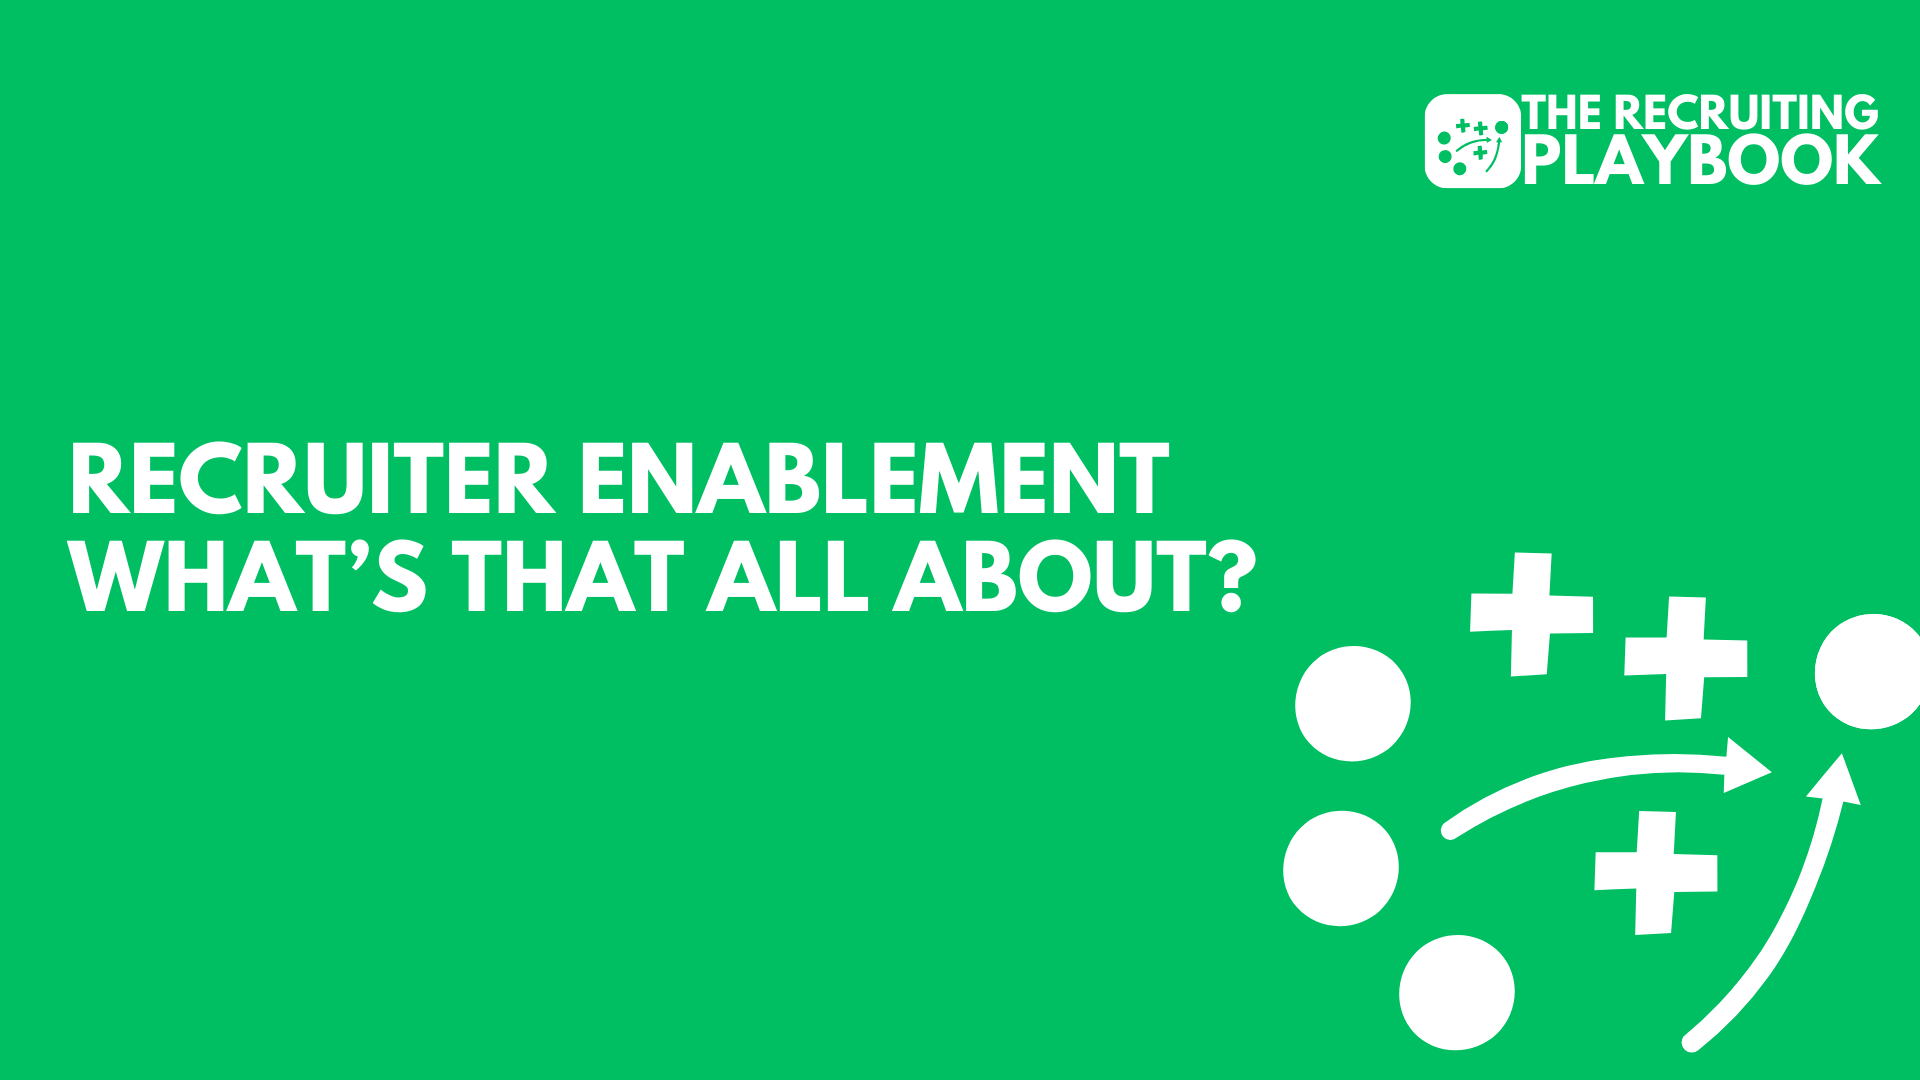 Recruiter Enablement? What’s that all about?